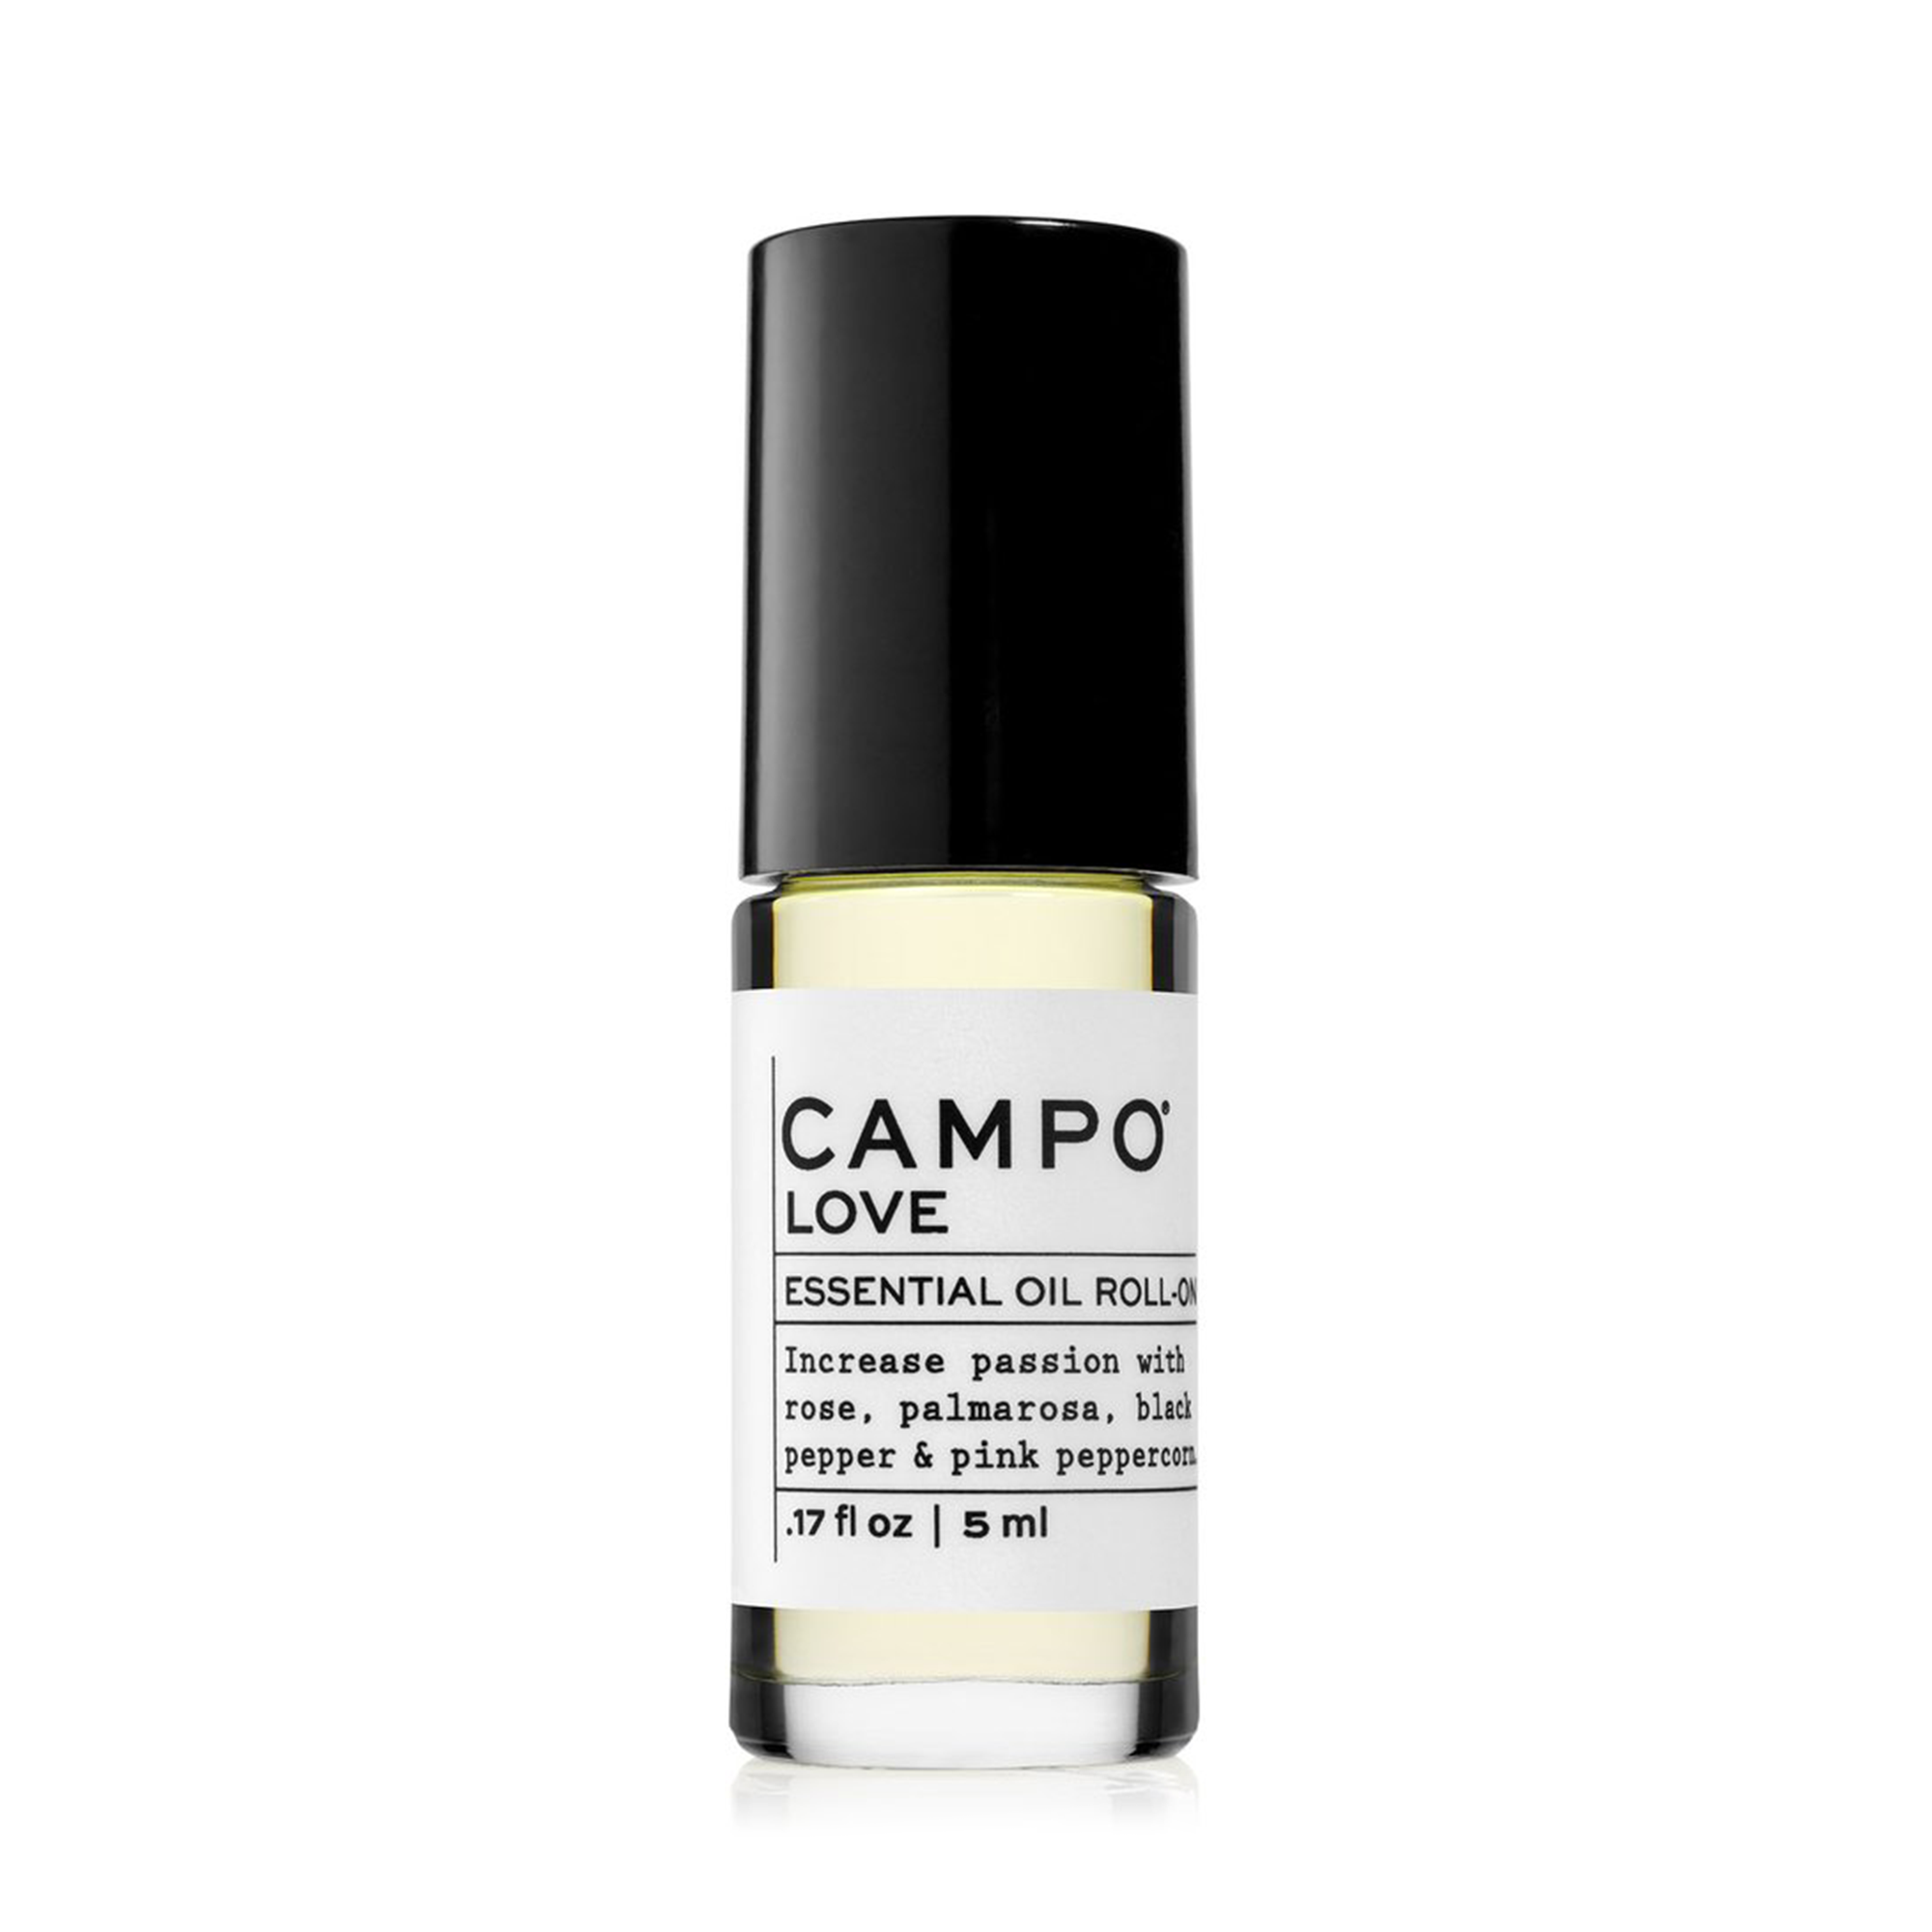 Combination of aromatic essential oils, thoughtfully crafted to balance emotional well being. Packed in a 5 ml, portable roll-on design for a comforting and soothing aromatic experience.